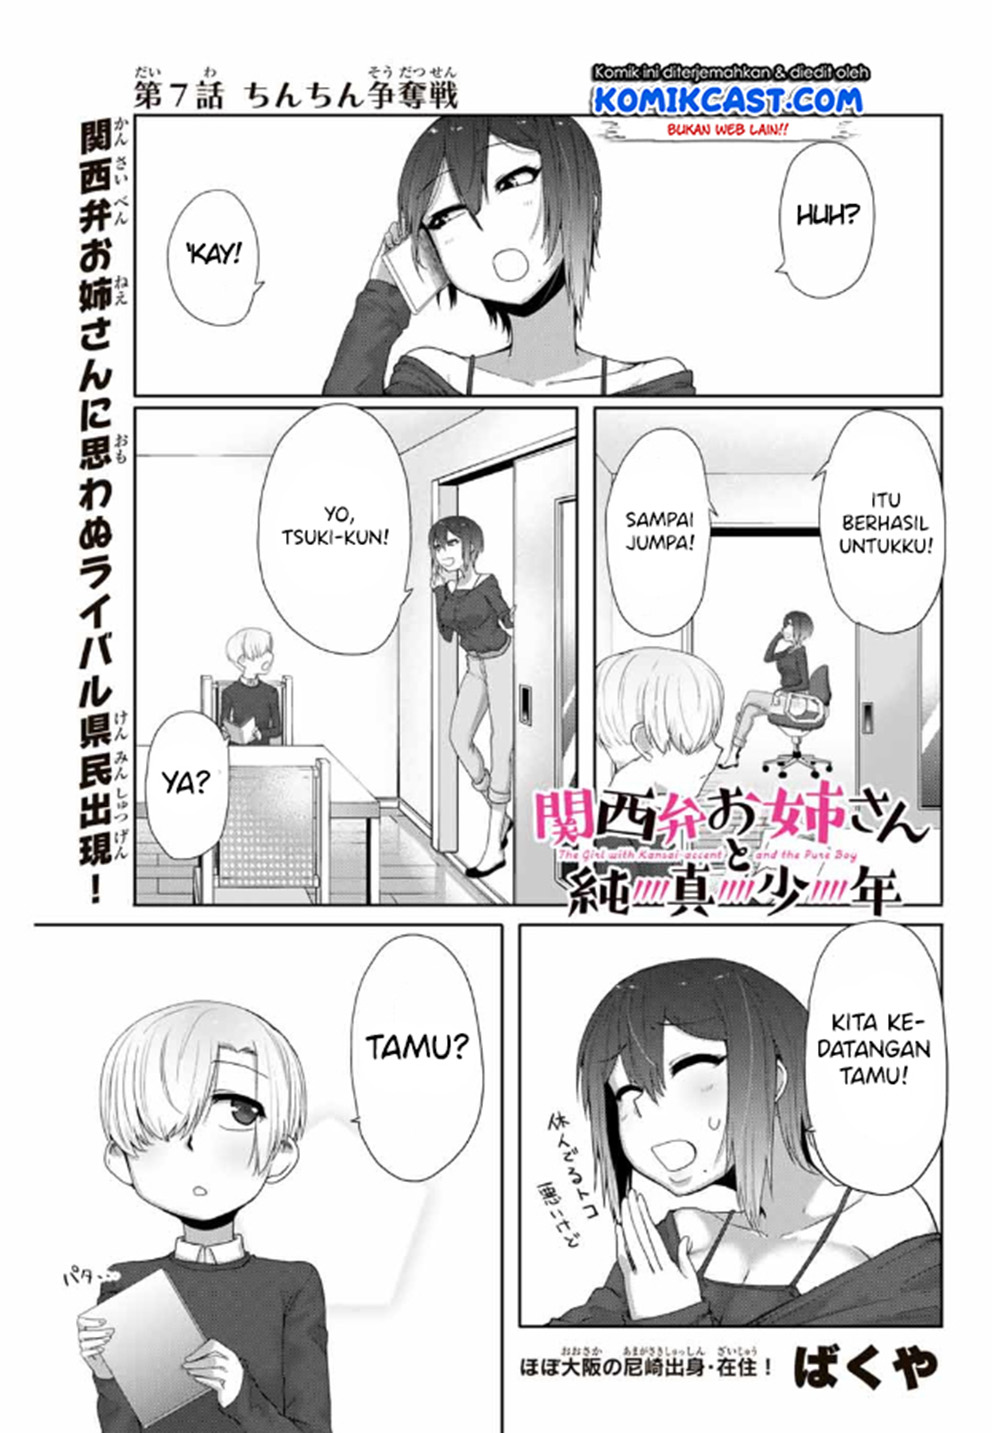 The Girl with a Kansai Accent and the Pure Boy Chapter 07 2